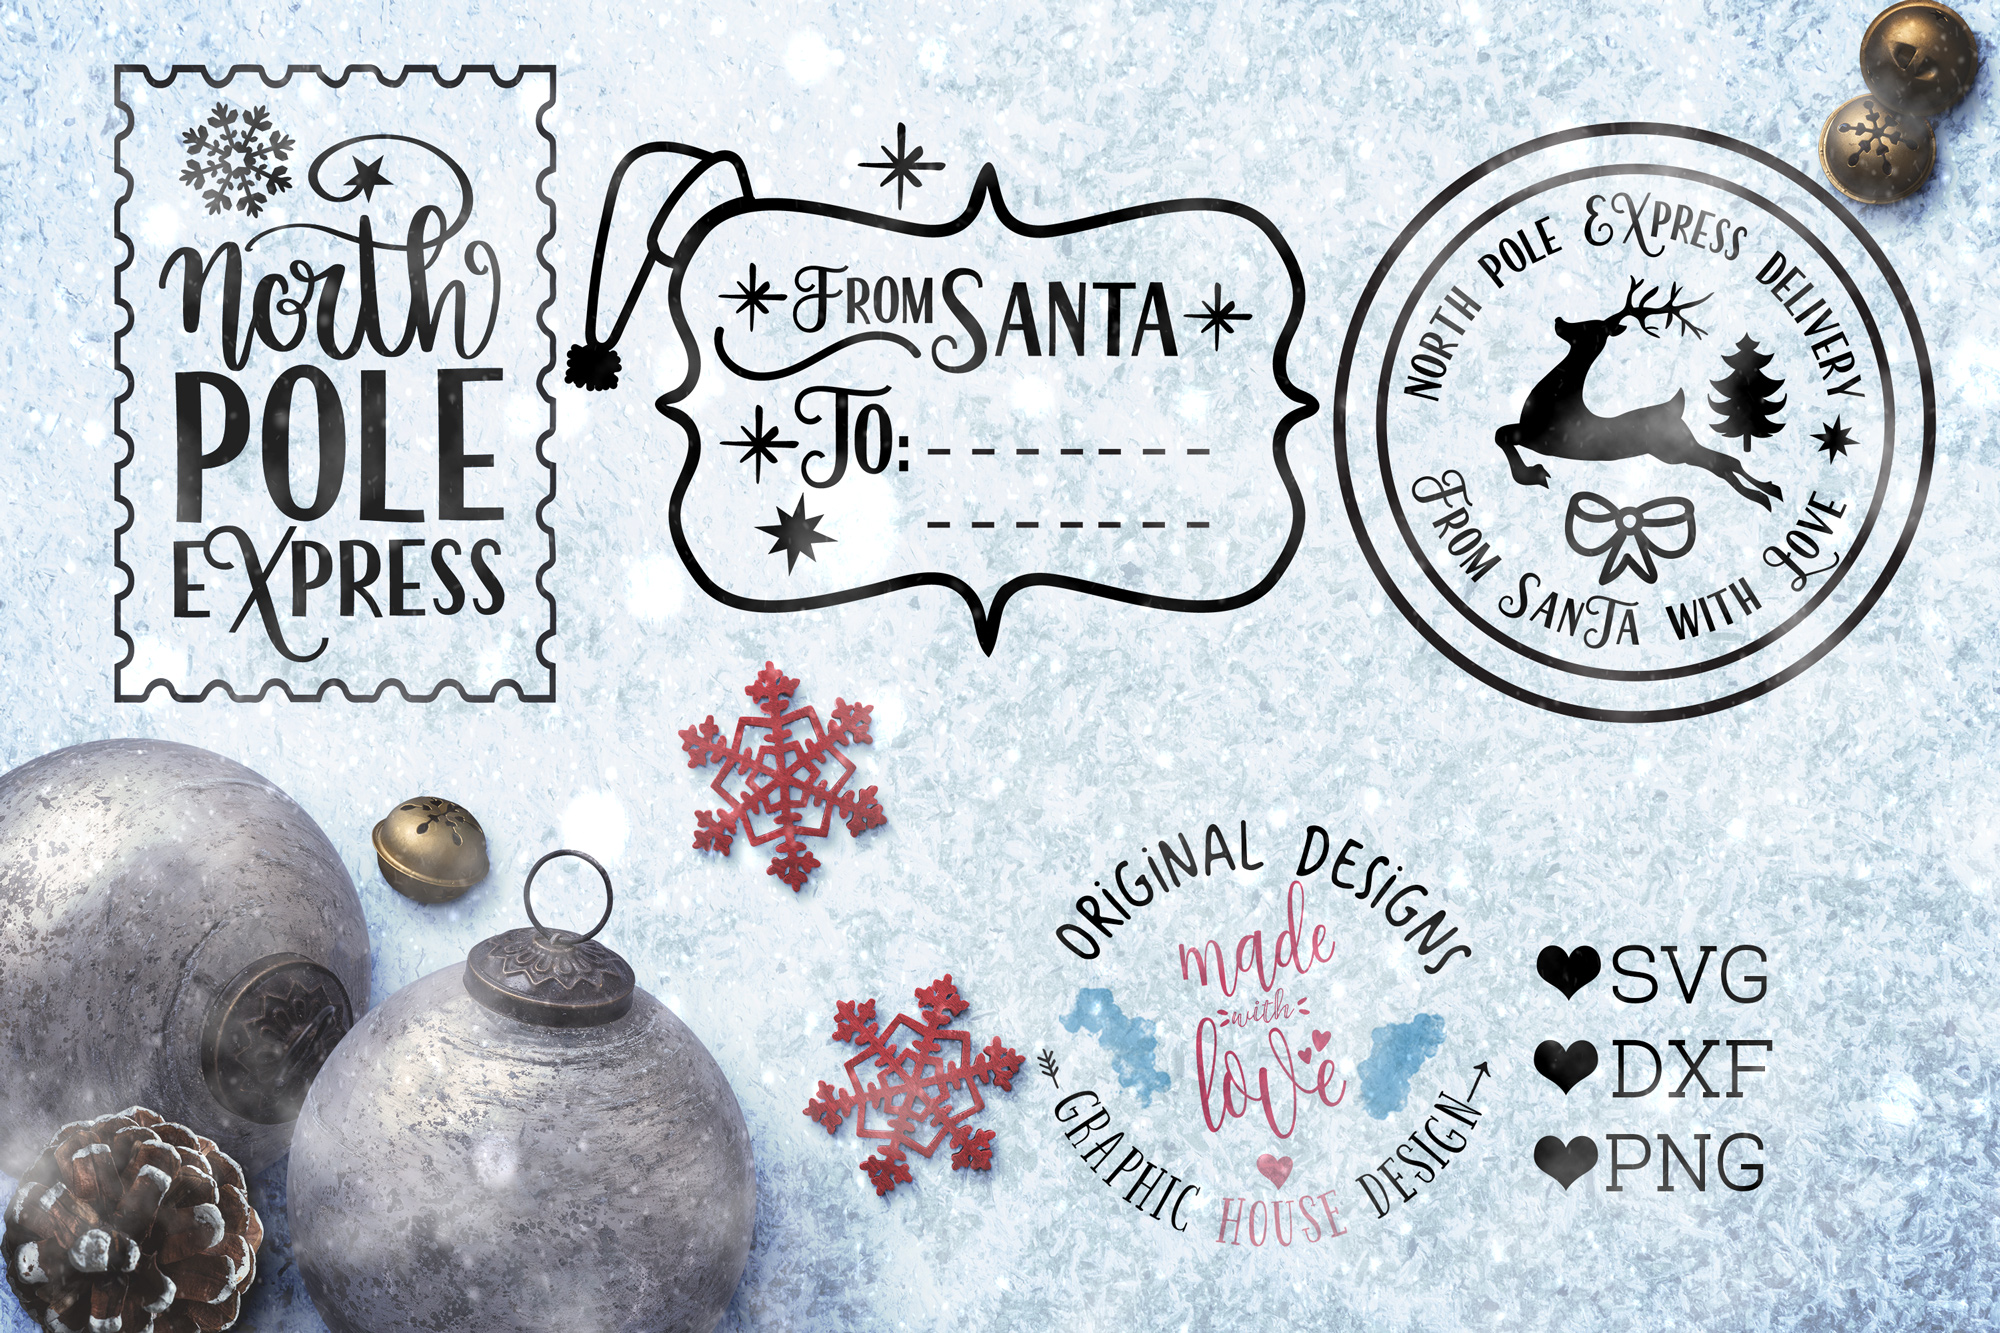 North Pole Express Delivery / From Sant | Design Bundles